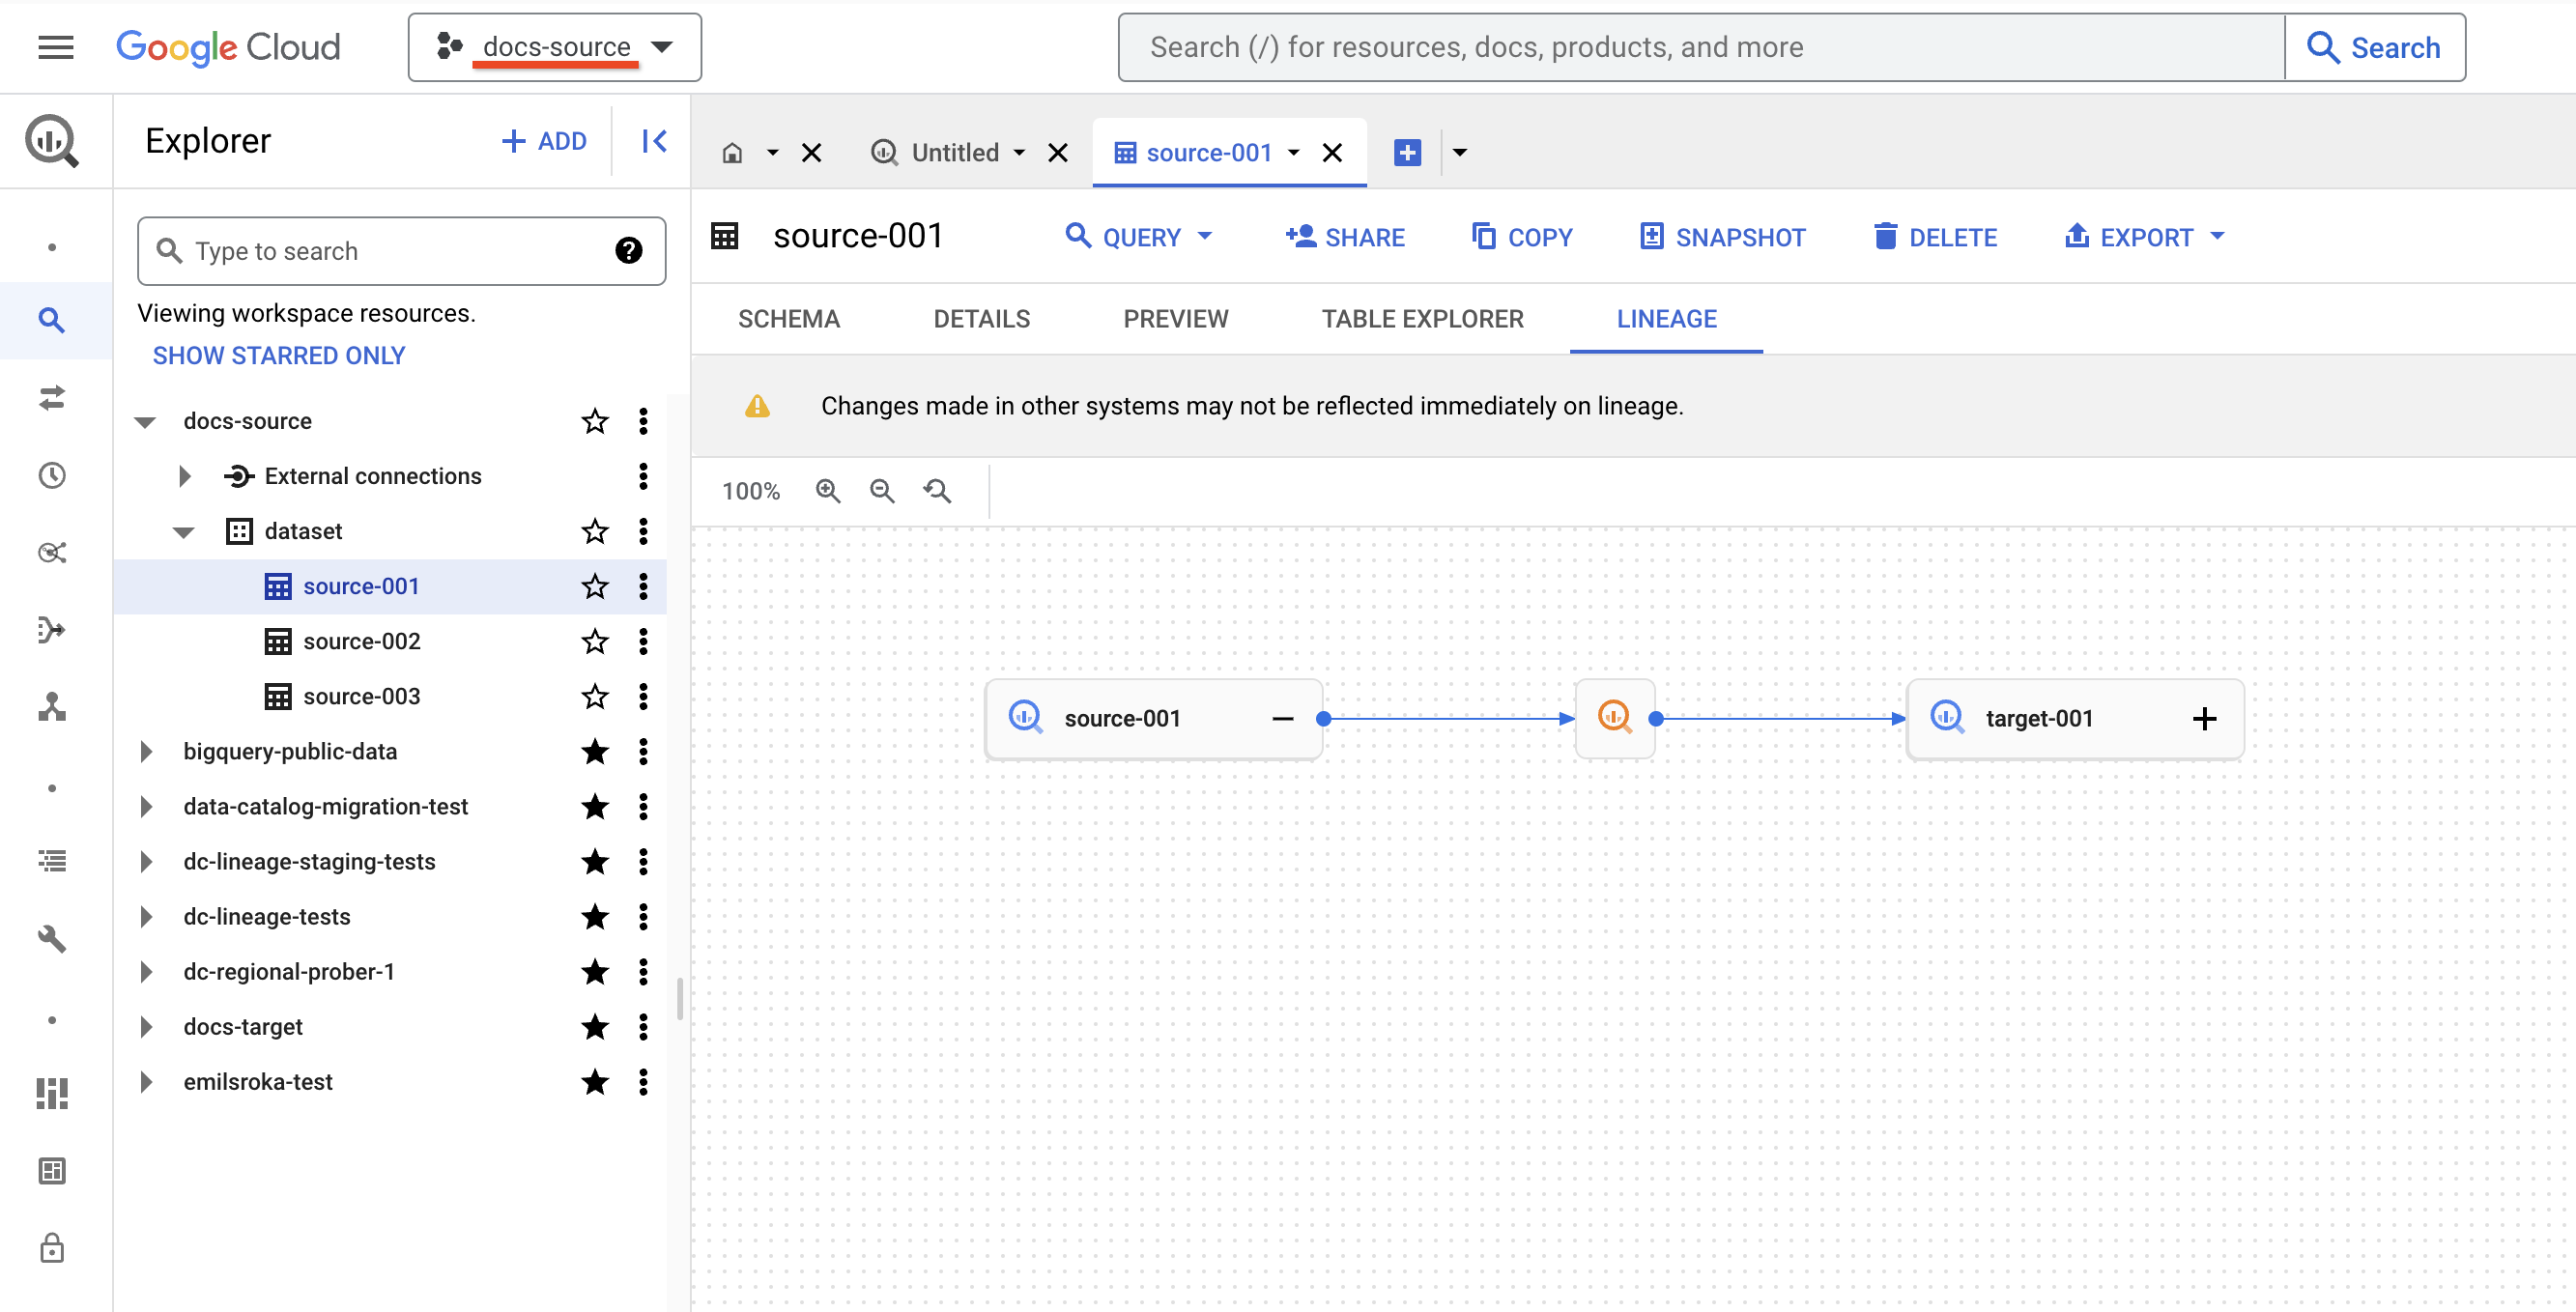 The BigQuery UI shows the data lineage for a
    dataset called source-001, which is in a project called docs-source.